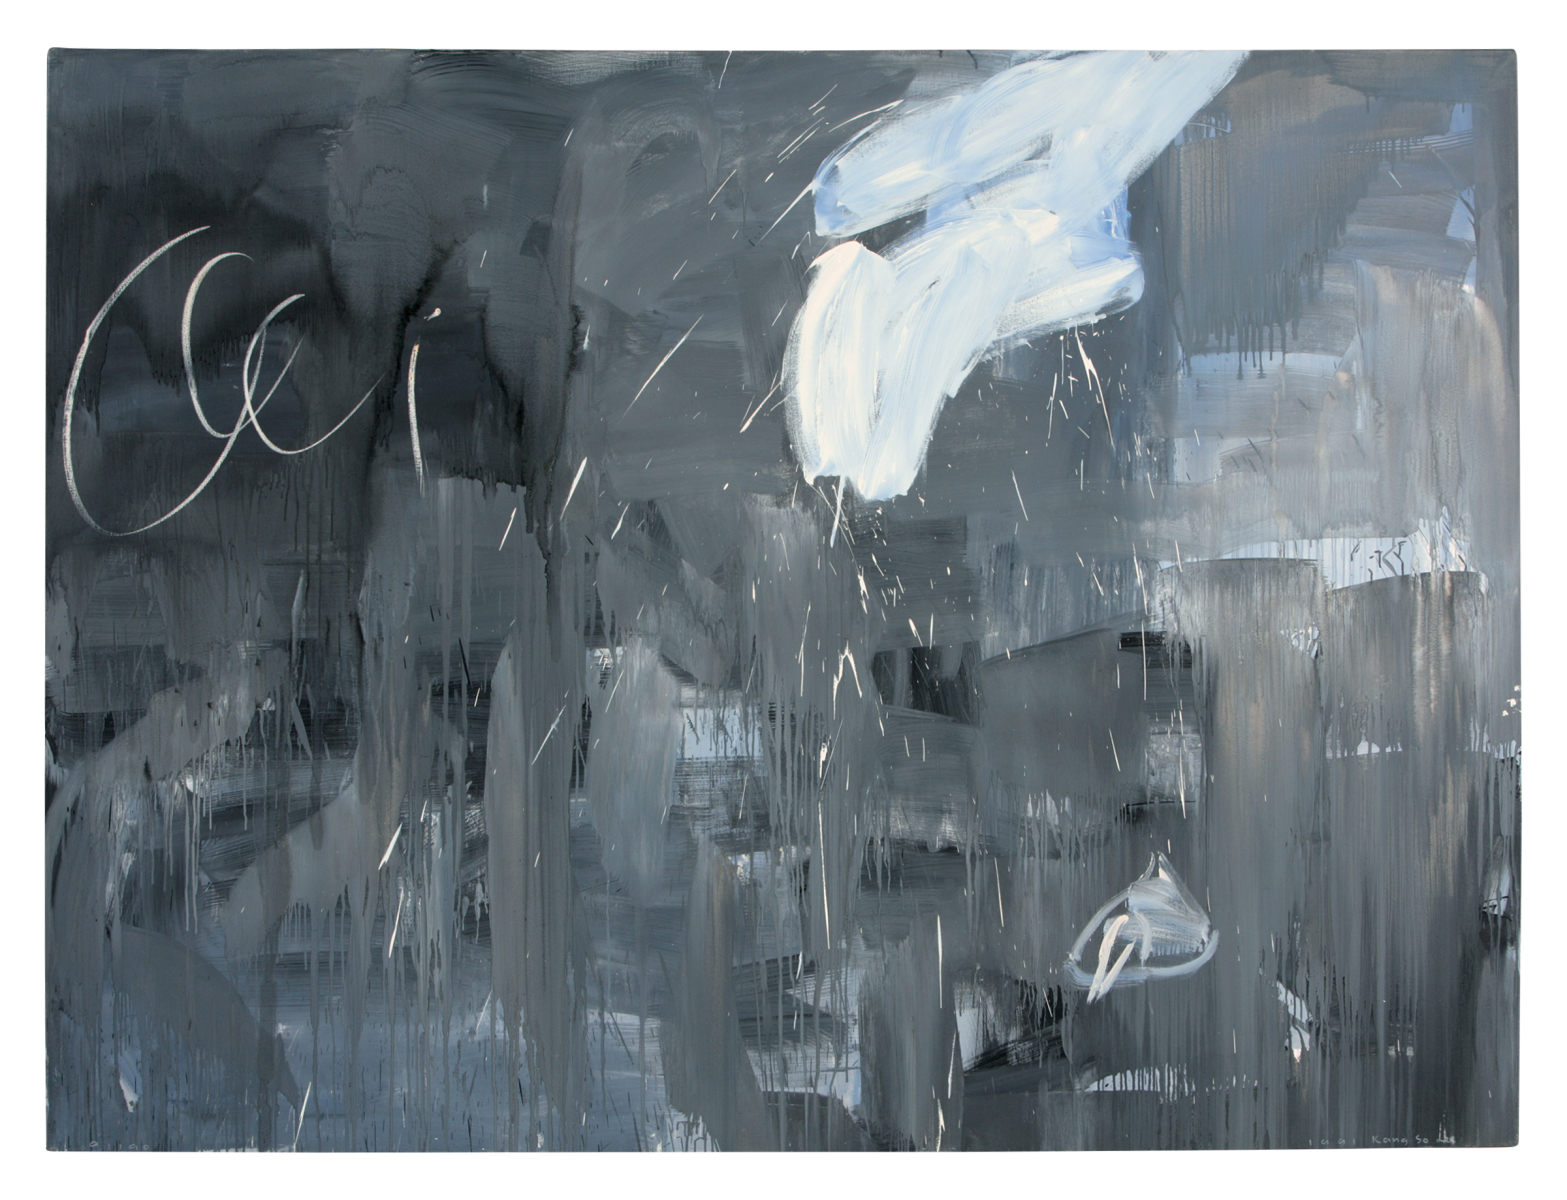 Untitled-91190, 1991, Oil on Canvas, 194x259cm